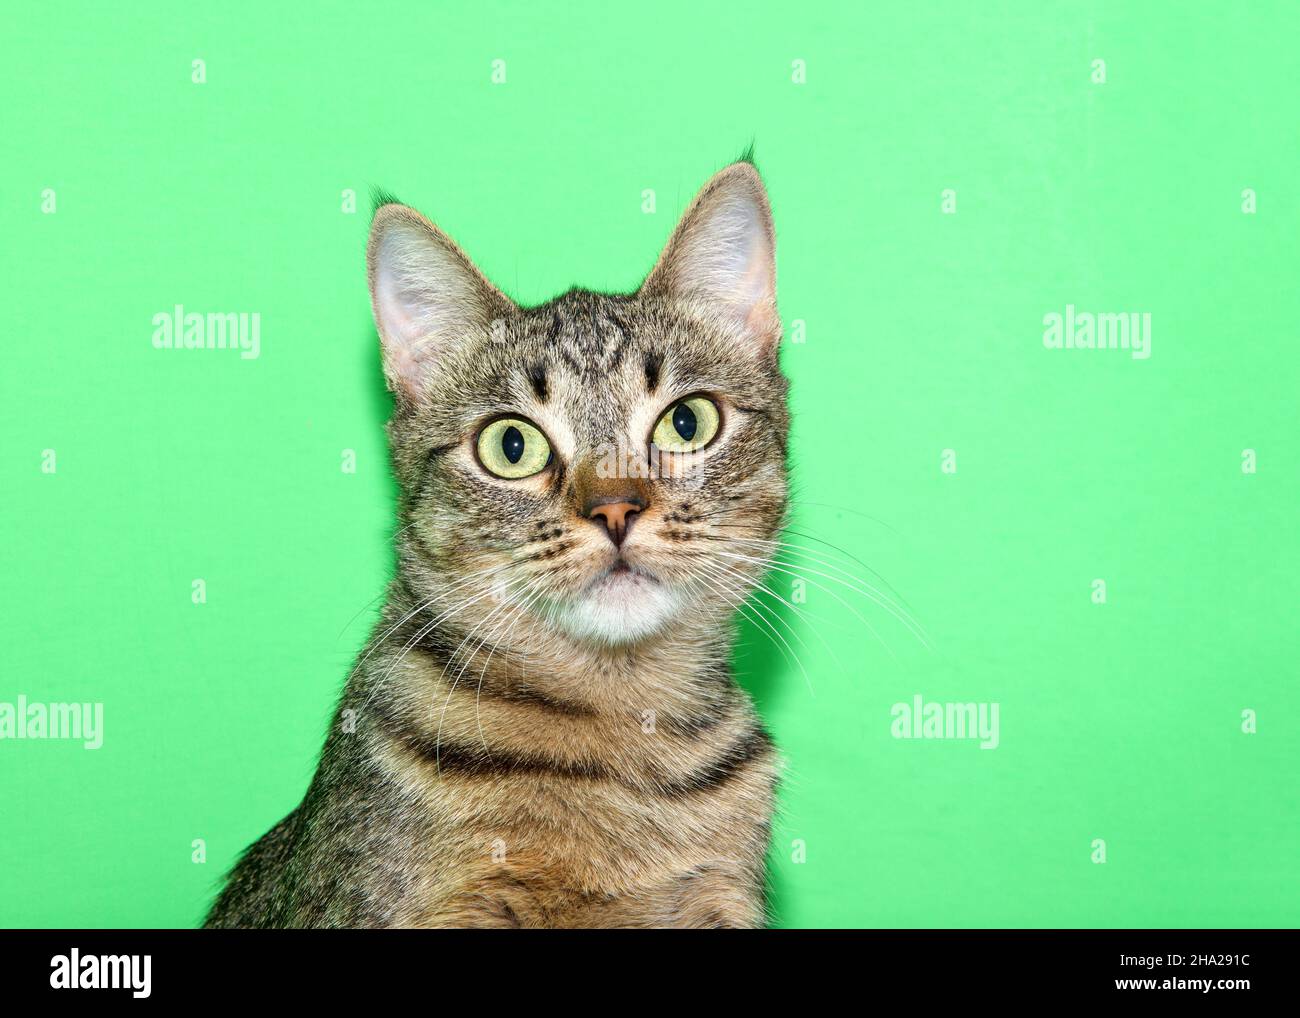 Portrait of an adorable brown tabby kitten with tilted head looking directly at viewer with bright green eyes. Green background with copy space. Stock Photo